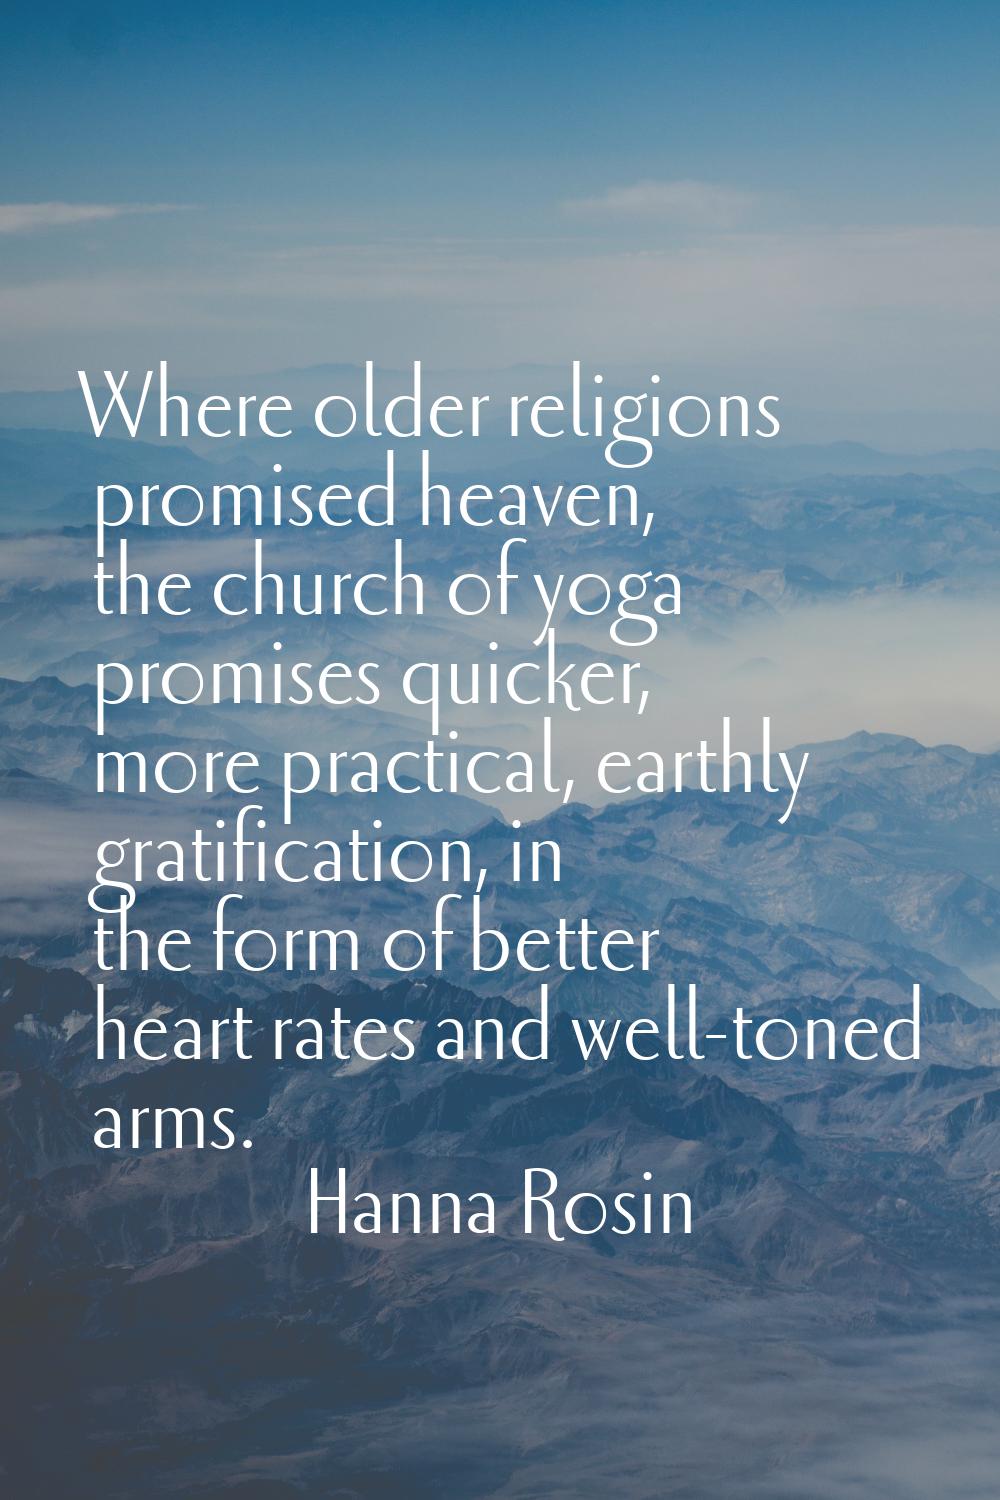 Where older religions promised heaven, the church of yoga promises quicker, more practical, earthly